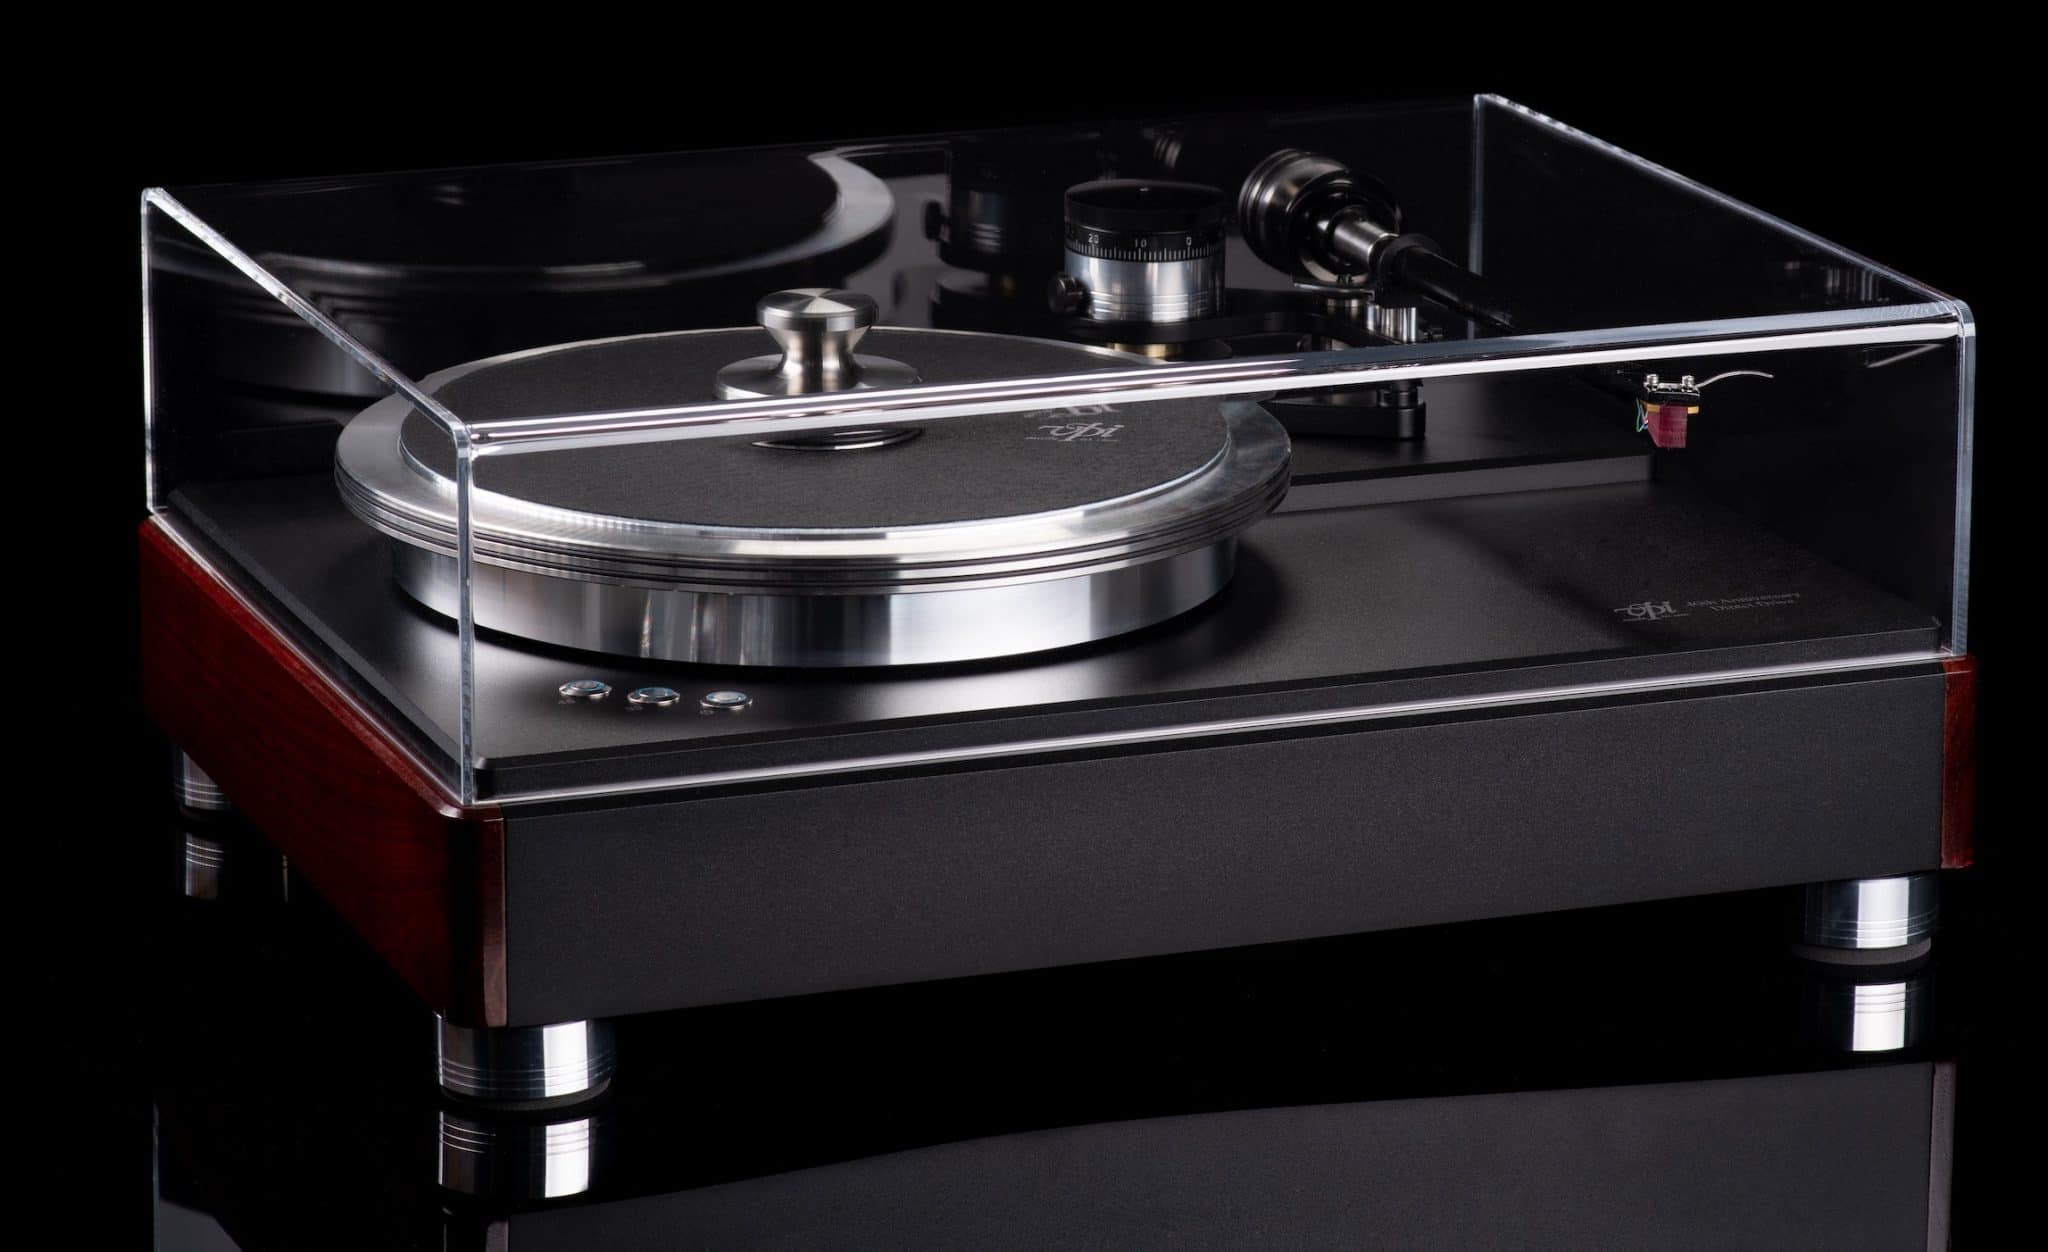 Direct Drive Turntable Review